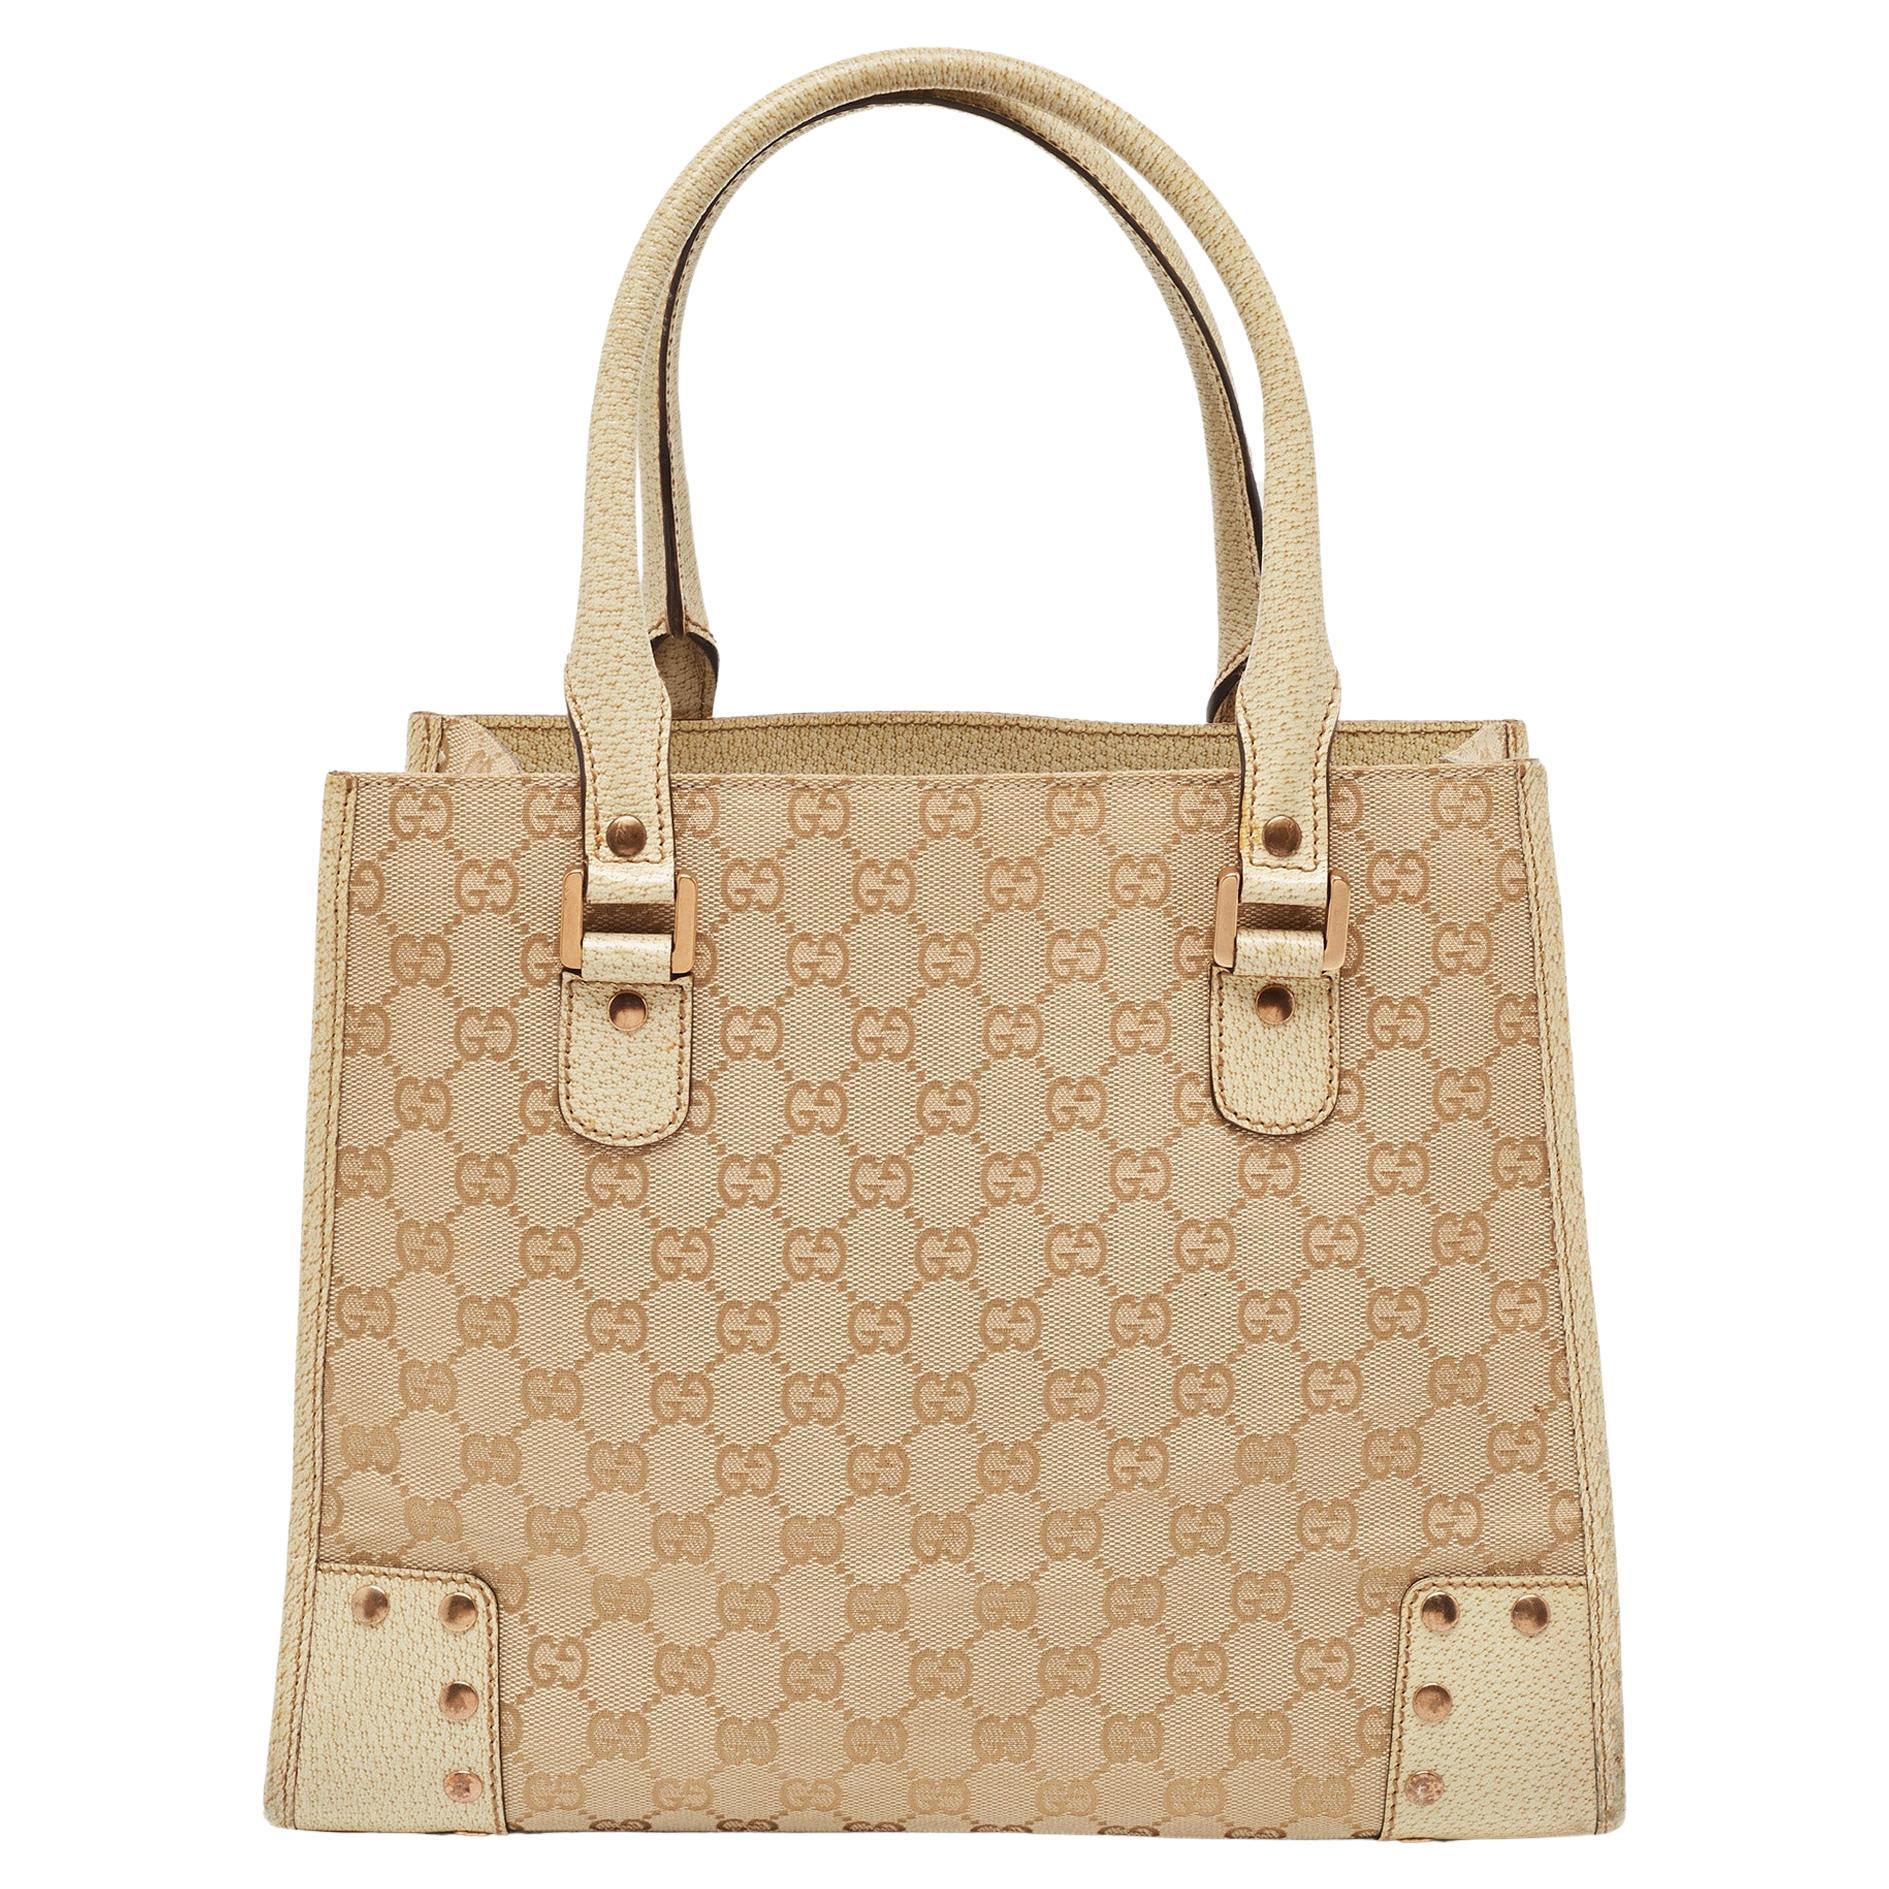 Gucci Beige/Cream GG Canvas and Leather Studded Tote